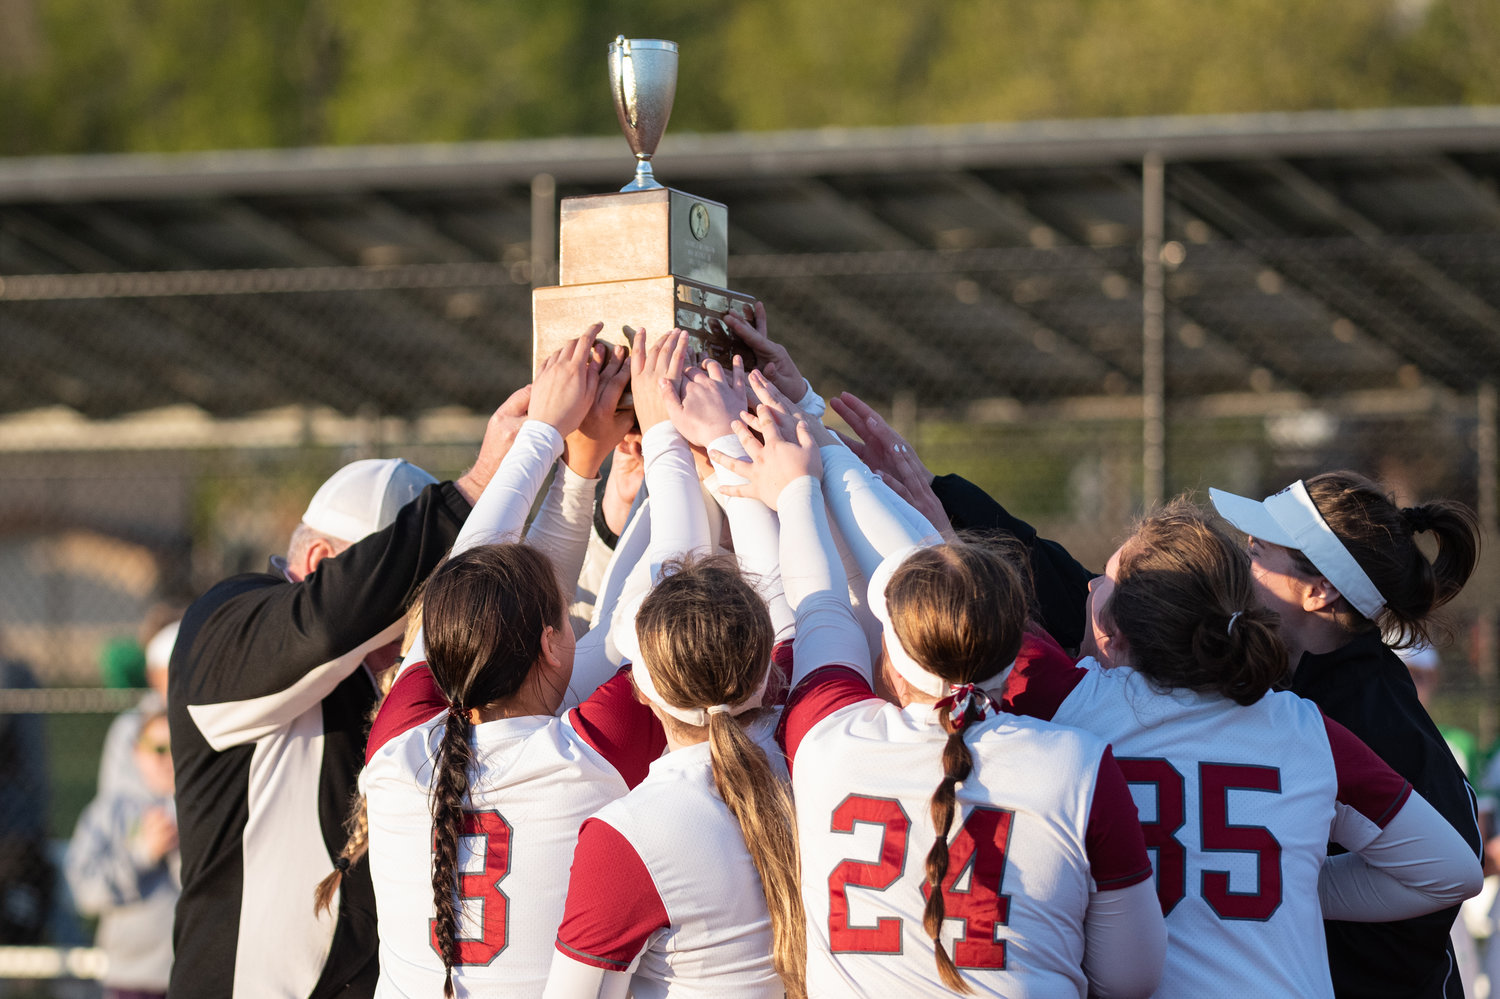 The W.F. West softball team holds up the district championship trophy after defeating Tumwater, 4-2, in the title game at Rec Park May 20.